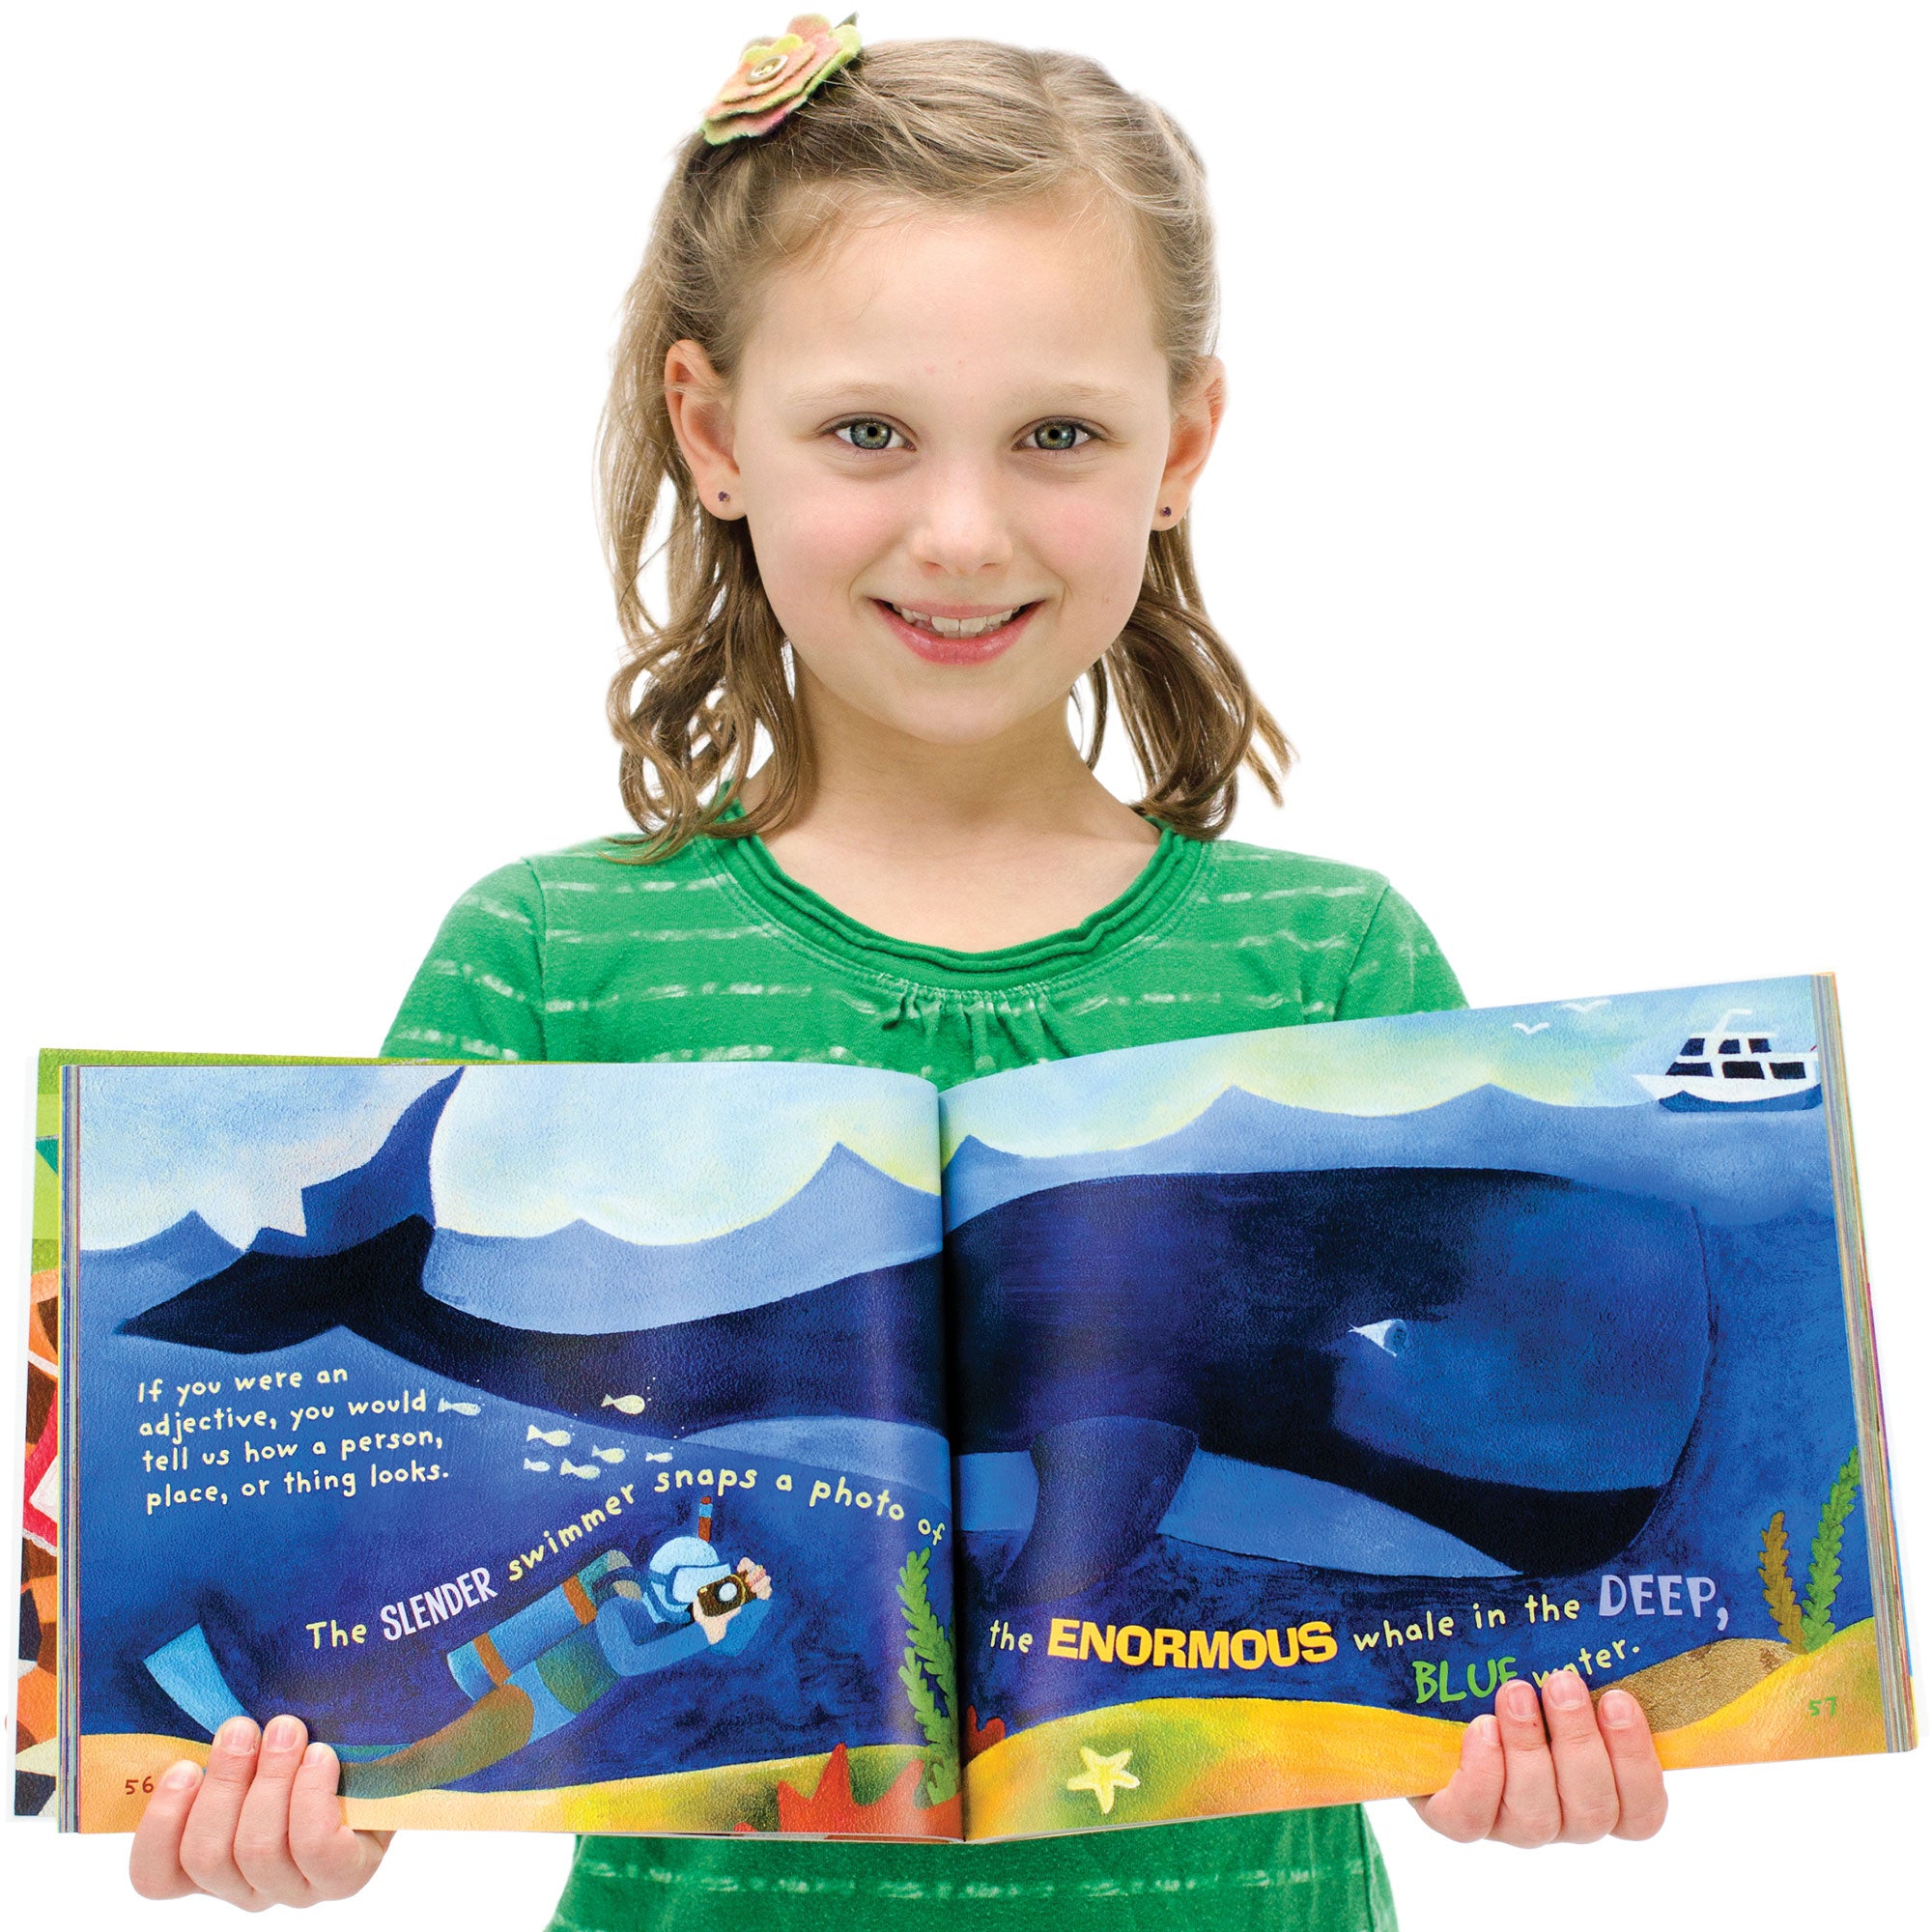 A young, blonde girl is smiling and holding open the Word Fun book to show inside pages. The pages show a large whale under the sea. There is a ship on top of the water, and a scuba diver under the water, taking a picture of the whale. The text on the pages reads “If you were an adjective, you would tell us how a person, place, or thing looks. The slender swimmer snaps a photo of the enormous whale in the deep, blue water.” The adjectives are large, bold, and colored differently than the rest of the text.